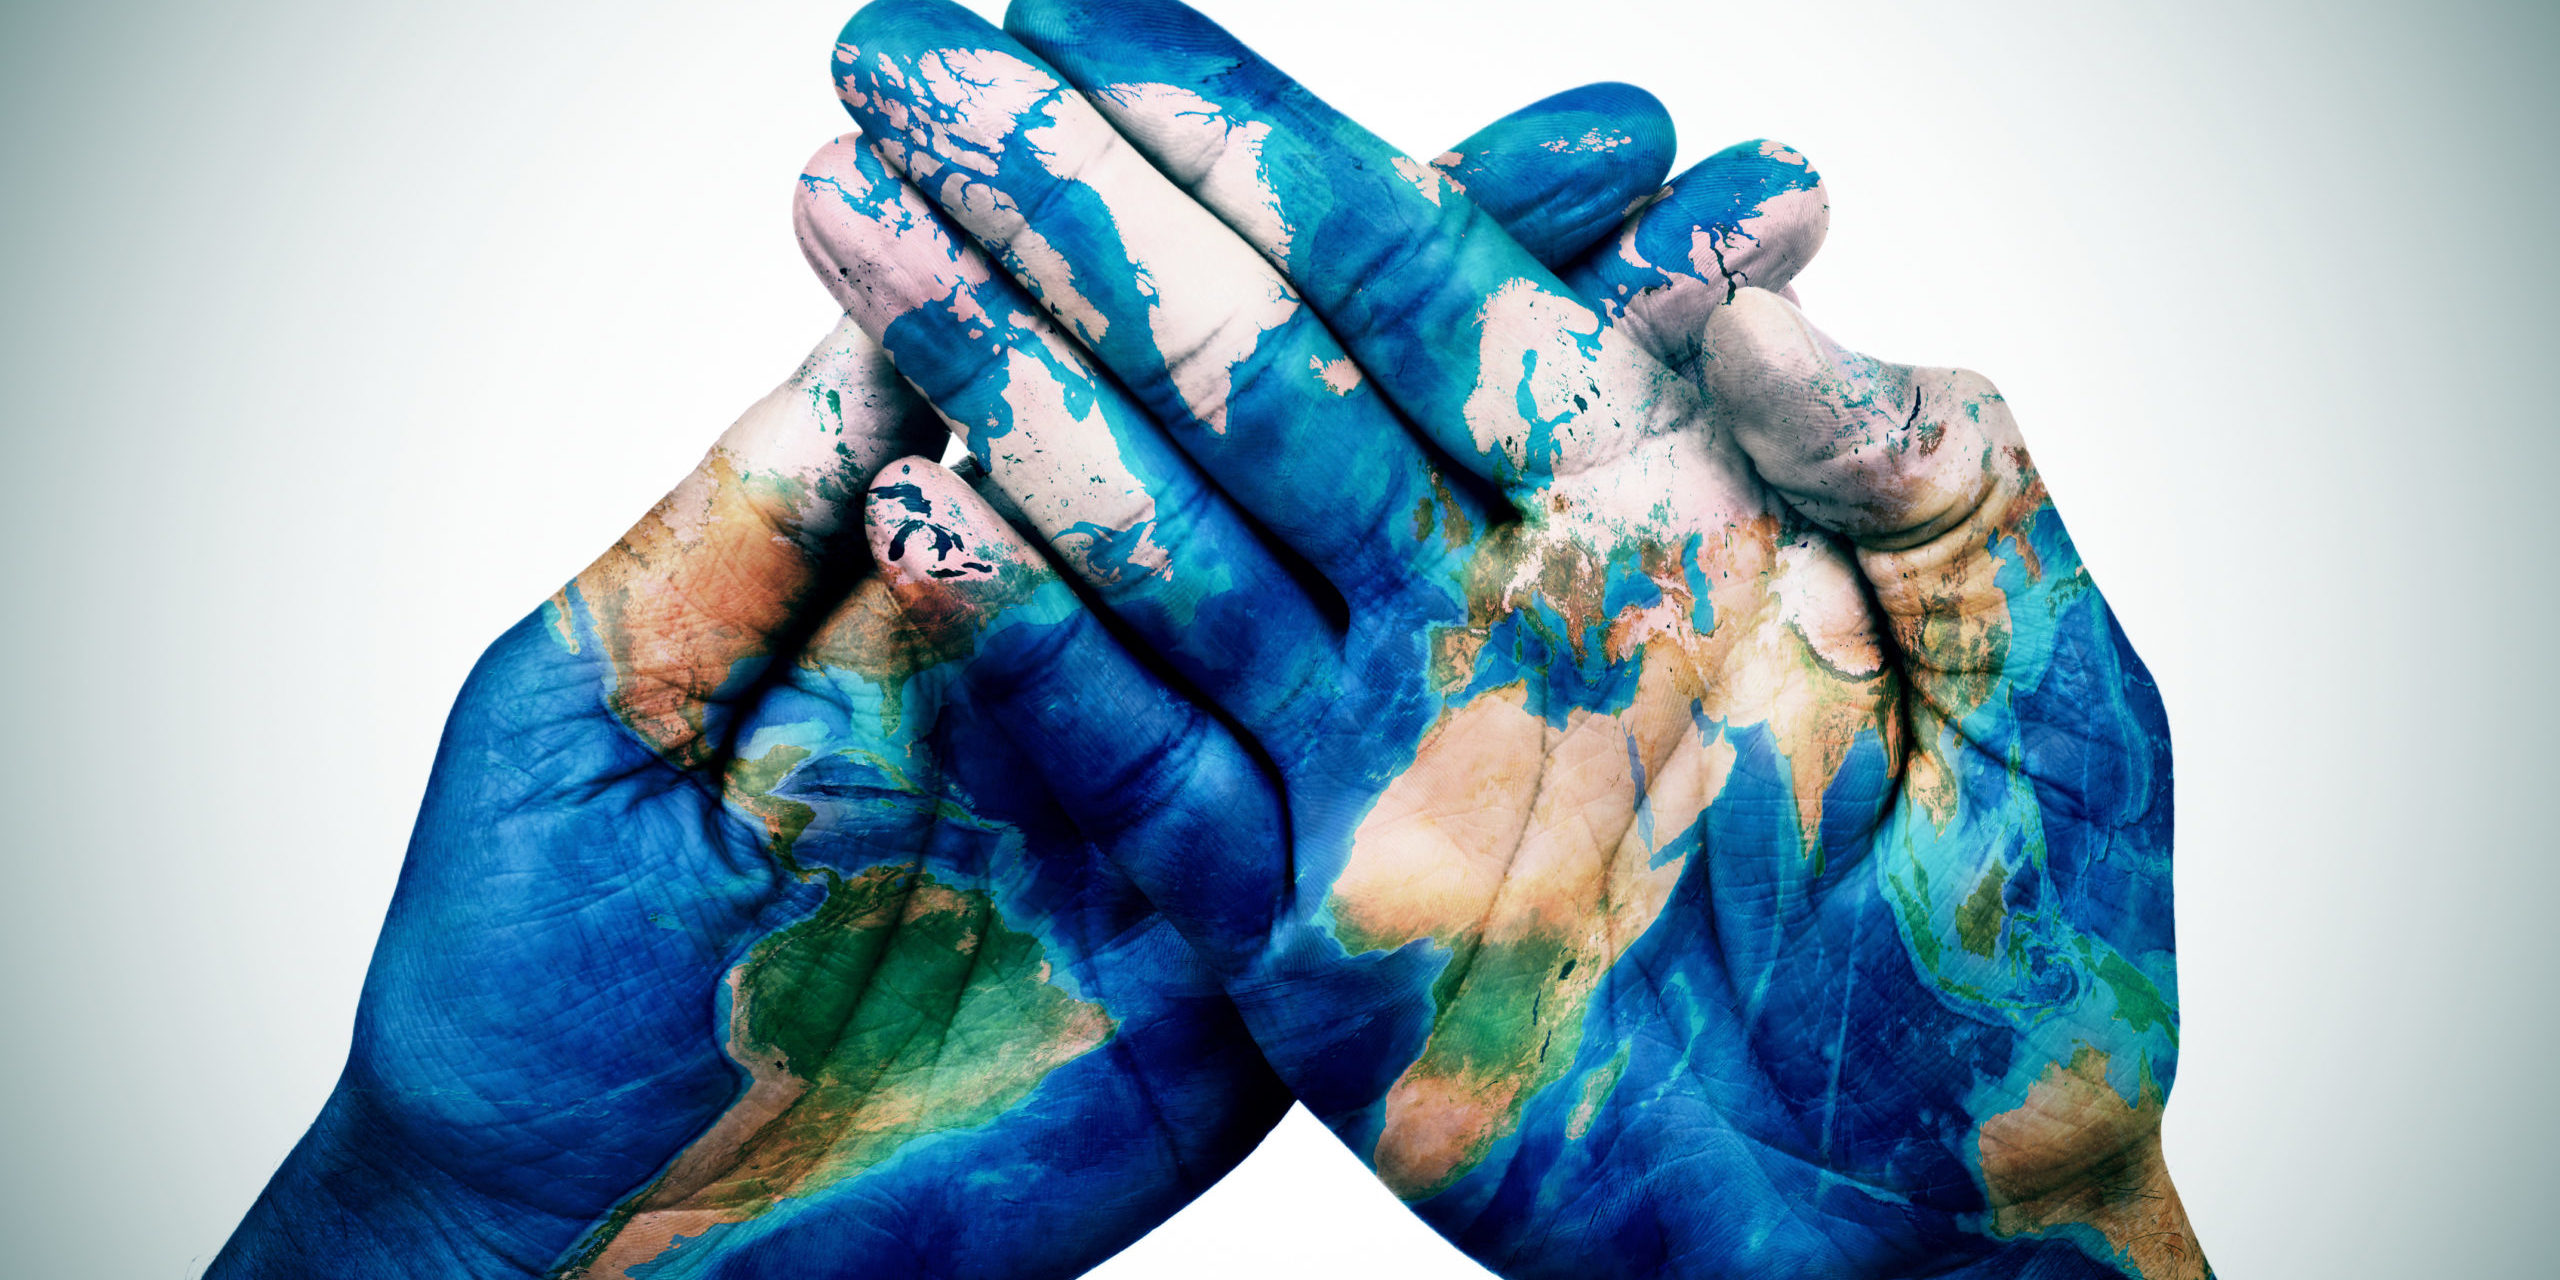 Man Hands Patterned With A World Map (furnished By NASA)